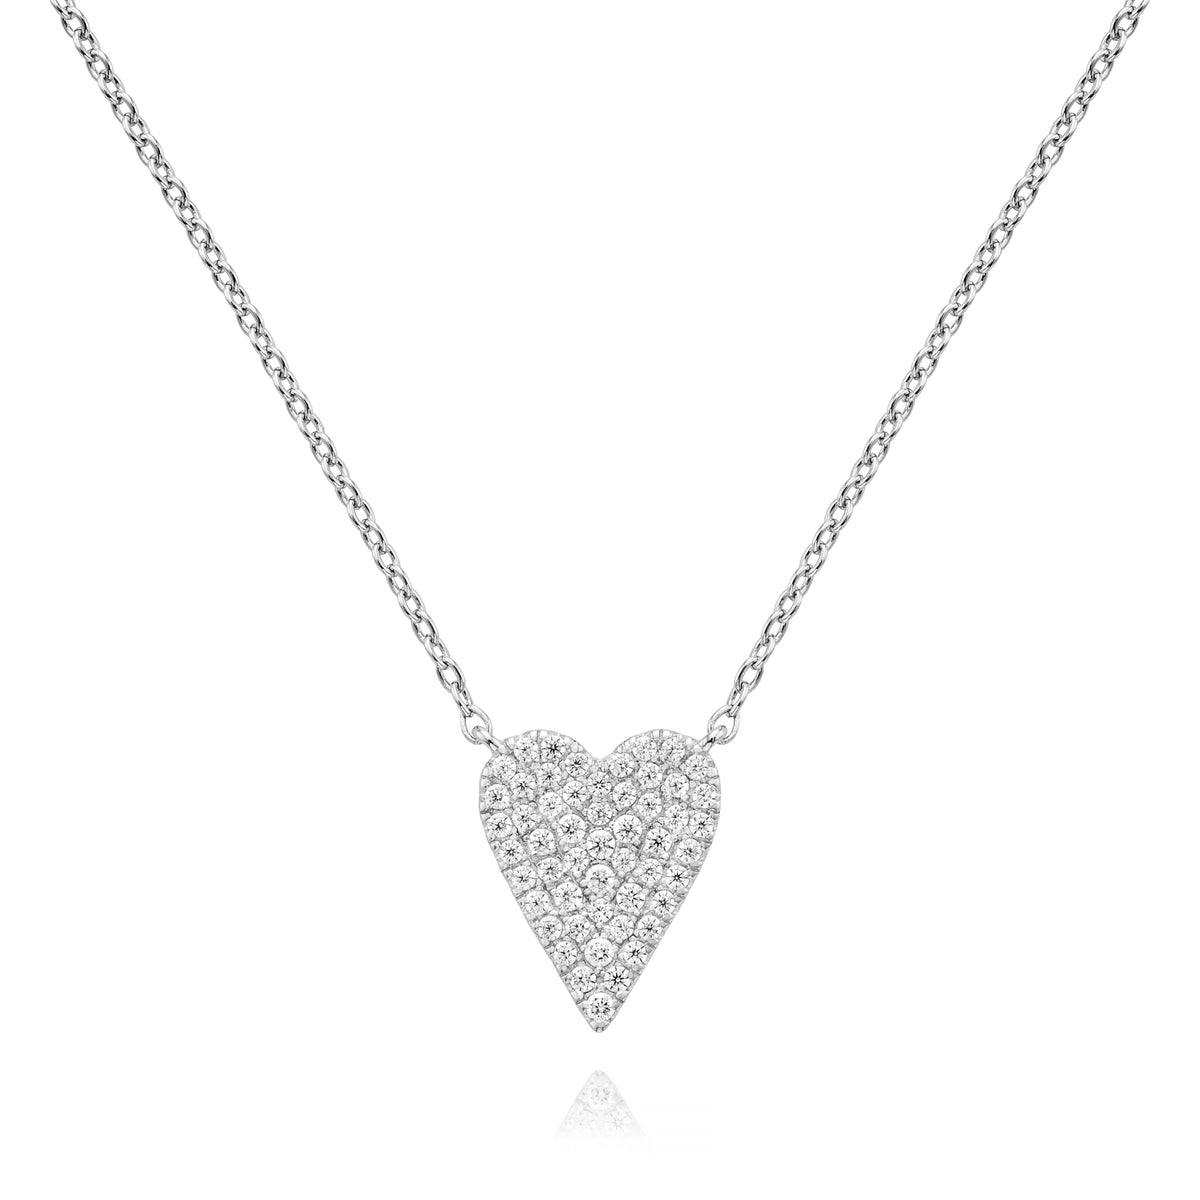 Sharp Heart Pave Necklace in White